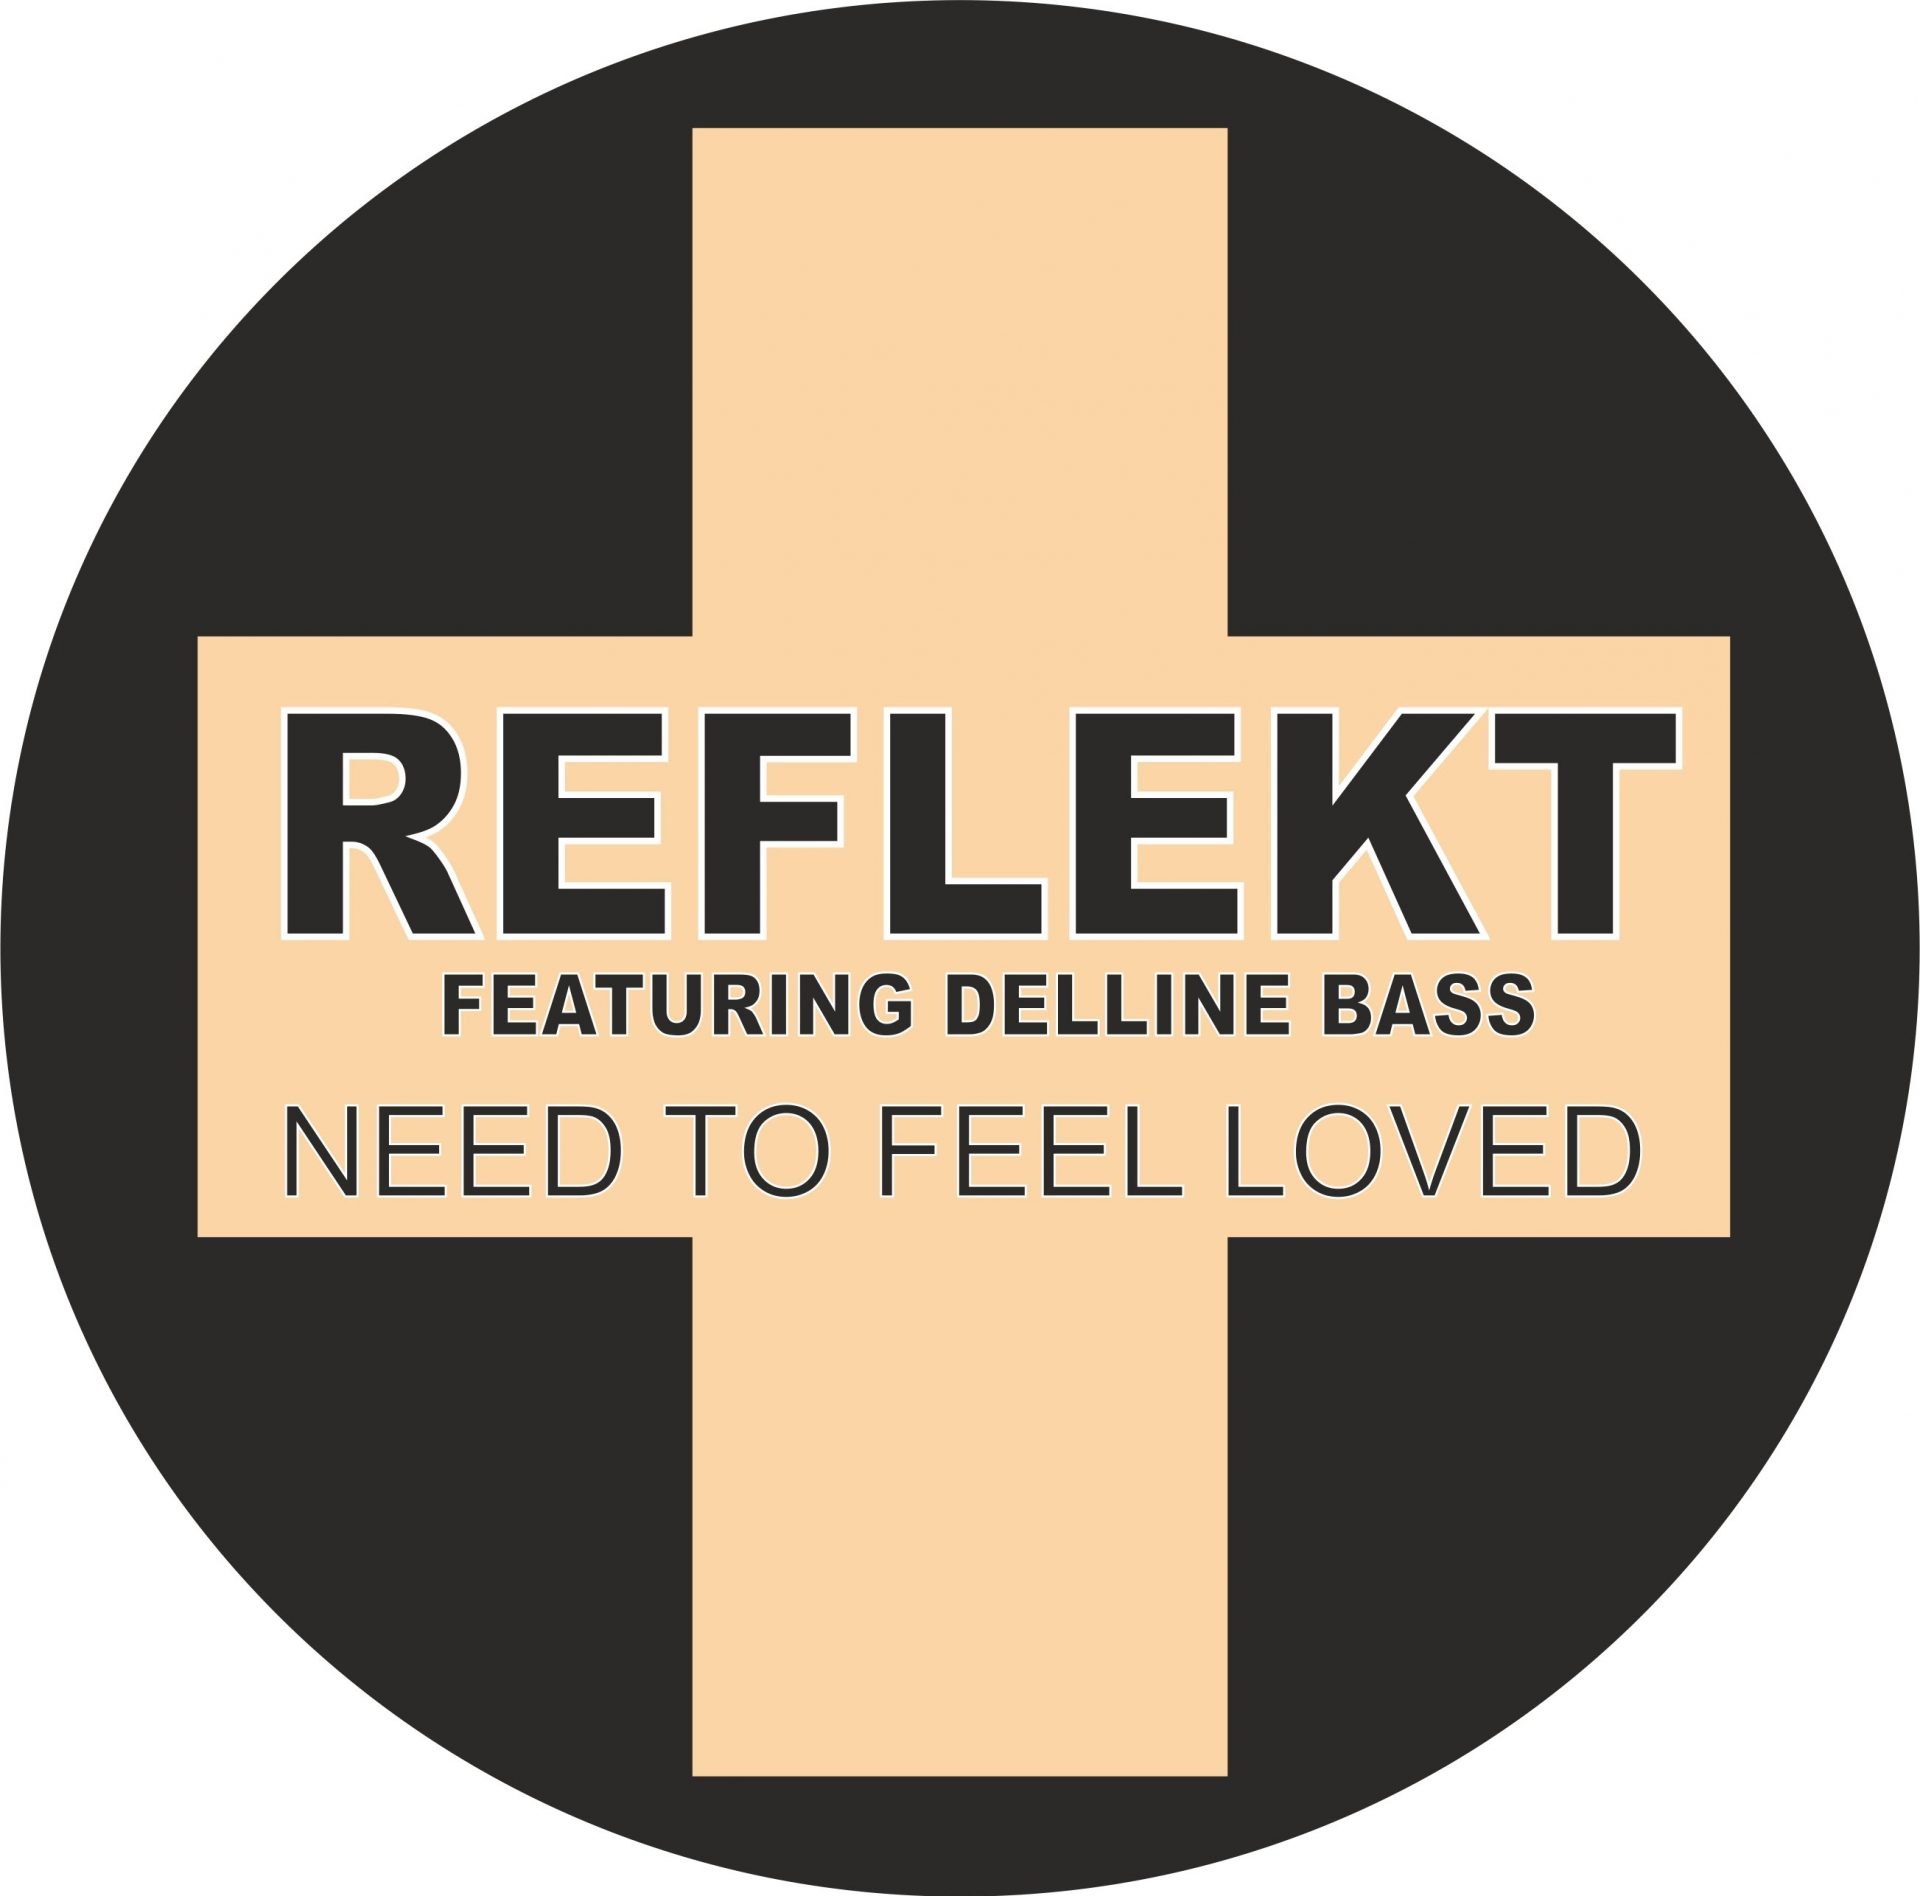 Need to feel loved feat delline. Reflekt ft. Delline Bass need to feel Loved. Reflekt feat. Delline Bass. Reflekt need to feel Loved. Adam k Soha need to feel Loved.